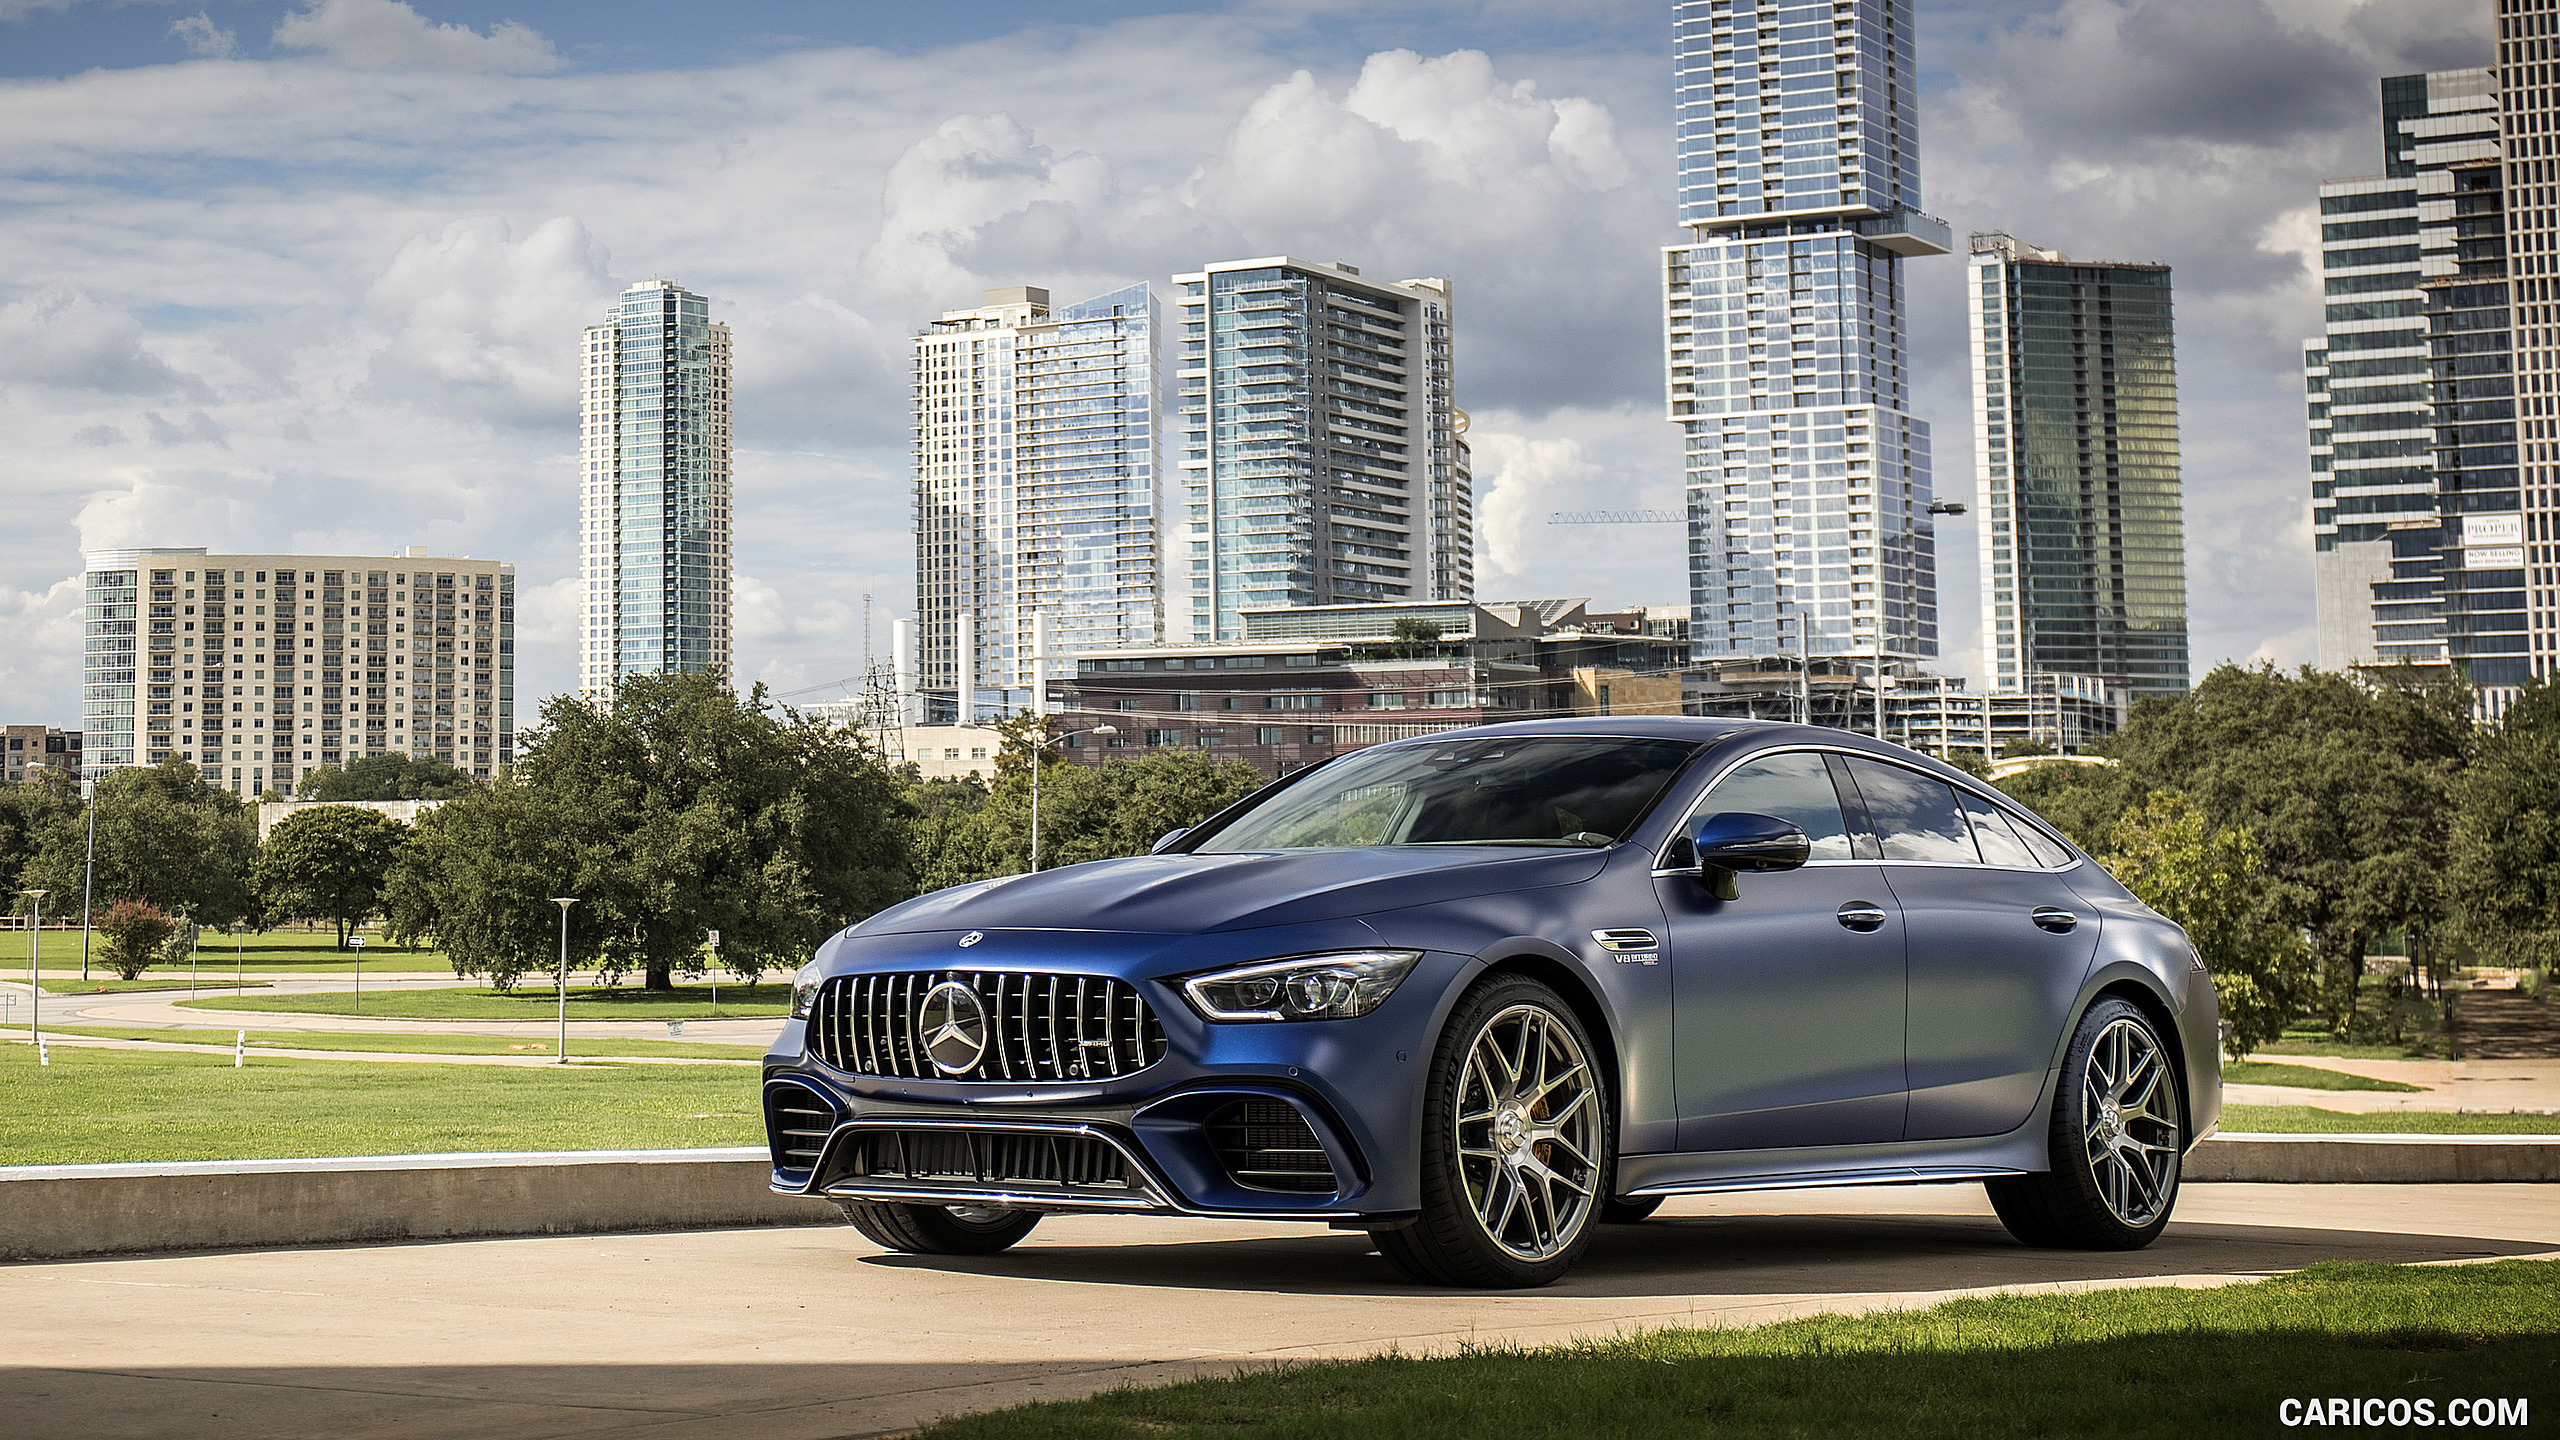 2019 Mercedes-AMG GT 63 S 4MATIC+ 4-Door Coupe - Front Three-Quarter, #123 of 427